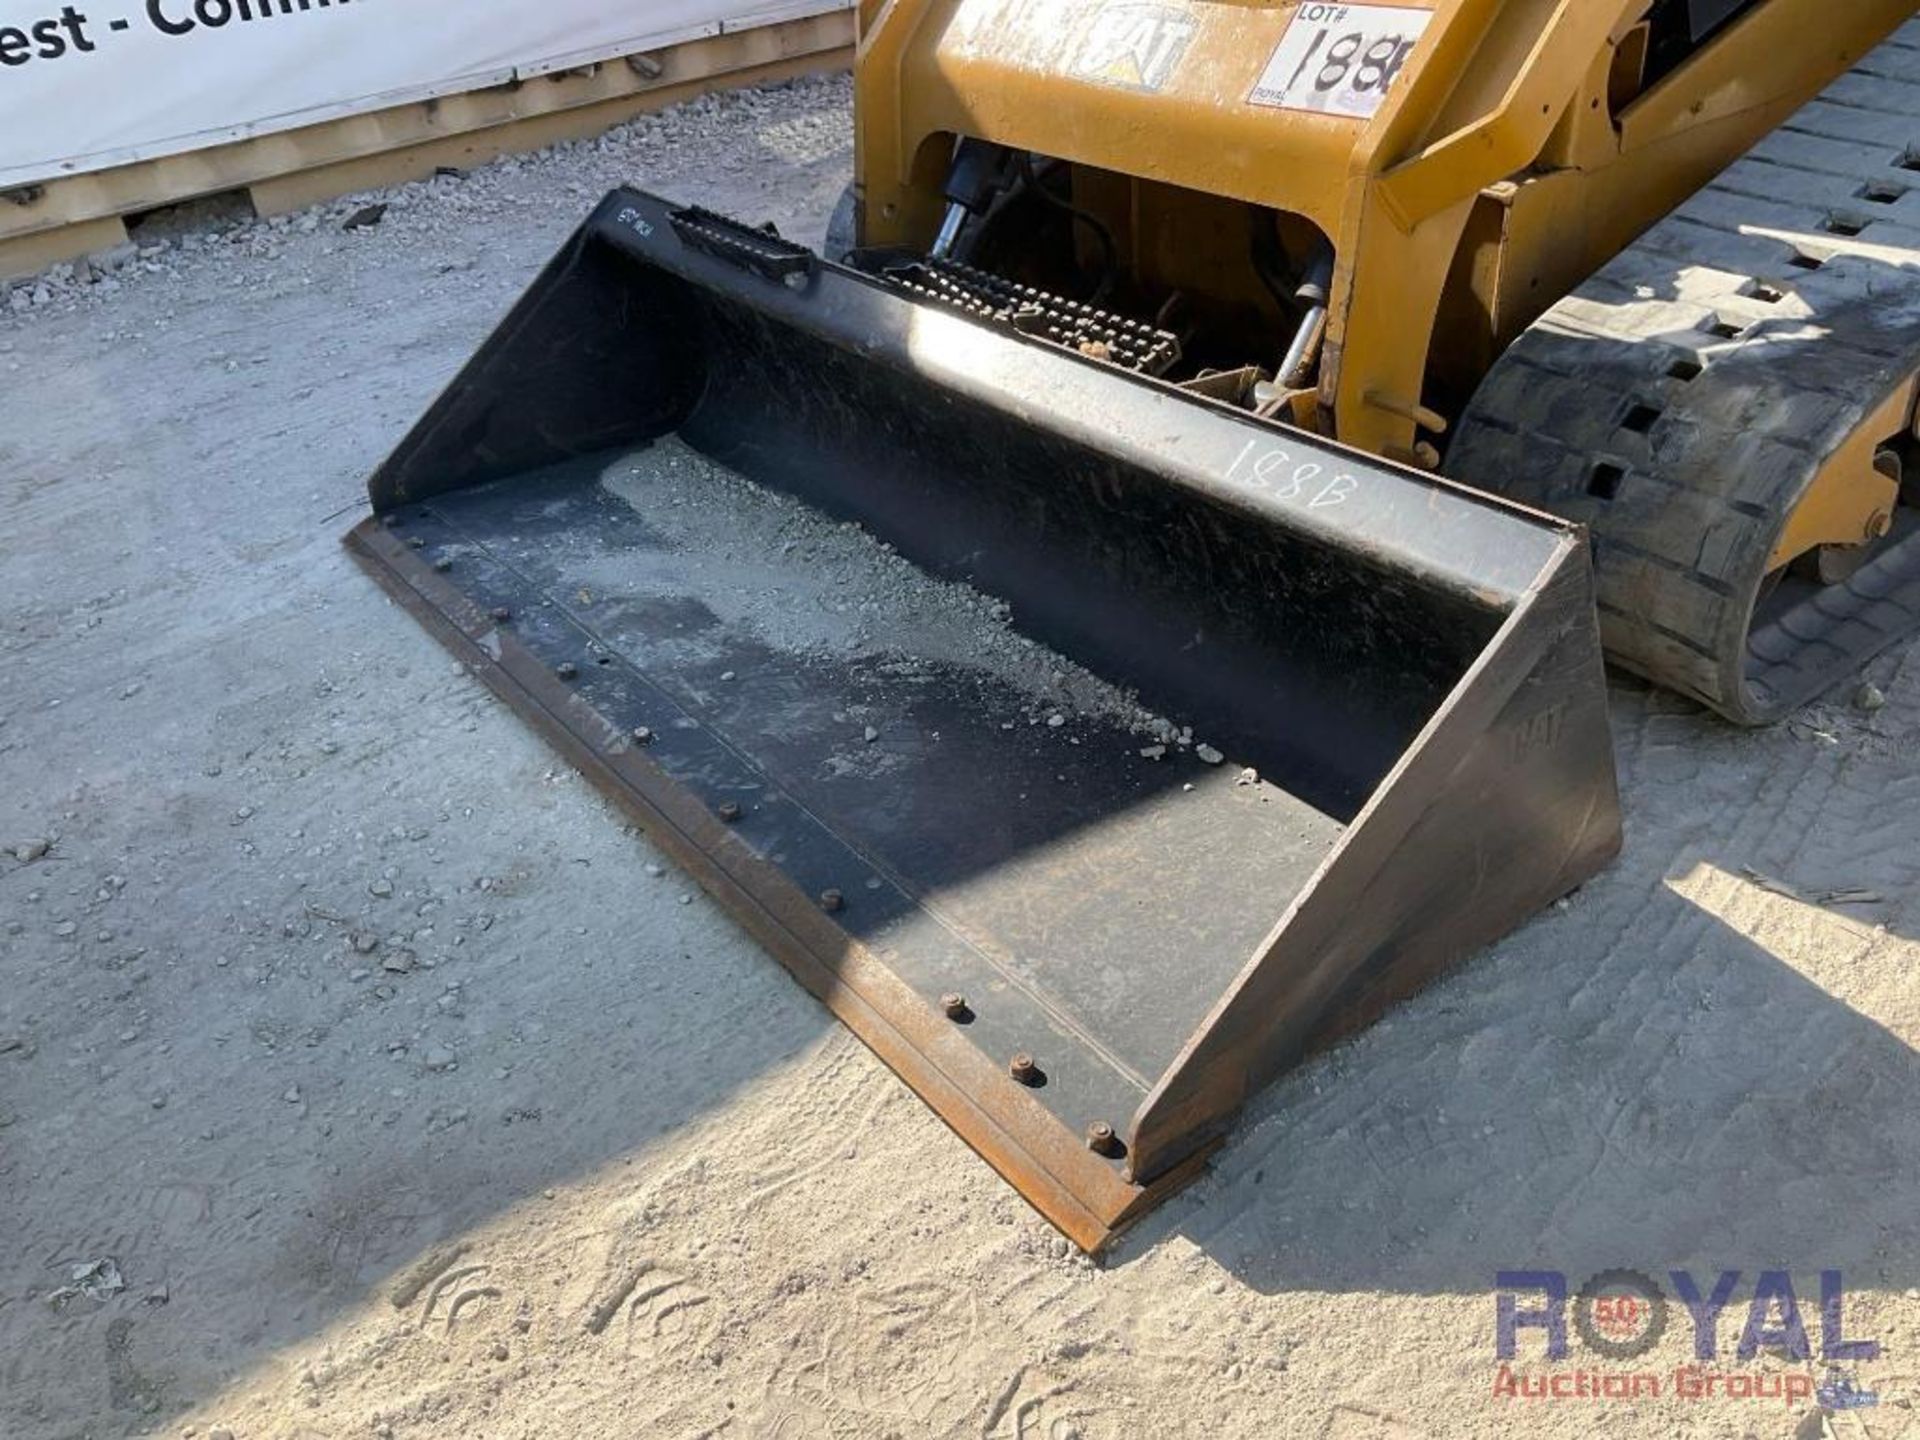 2018 Caterpillar 289D Compact Track Loader Skid Steer - Image 21 of 23